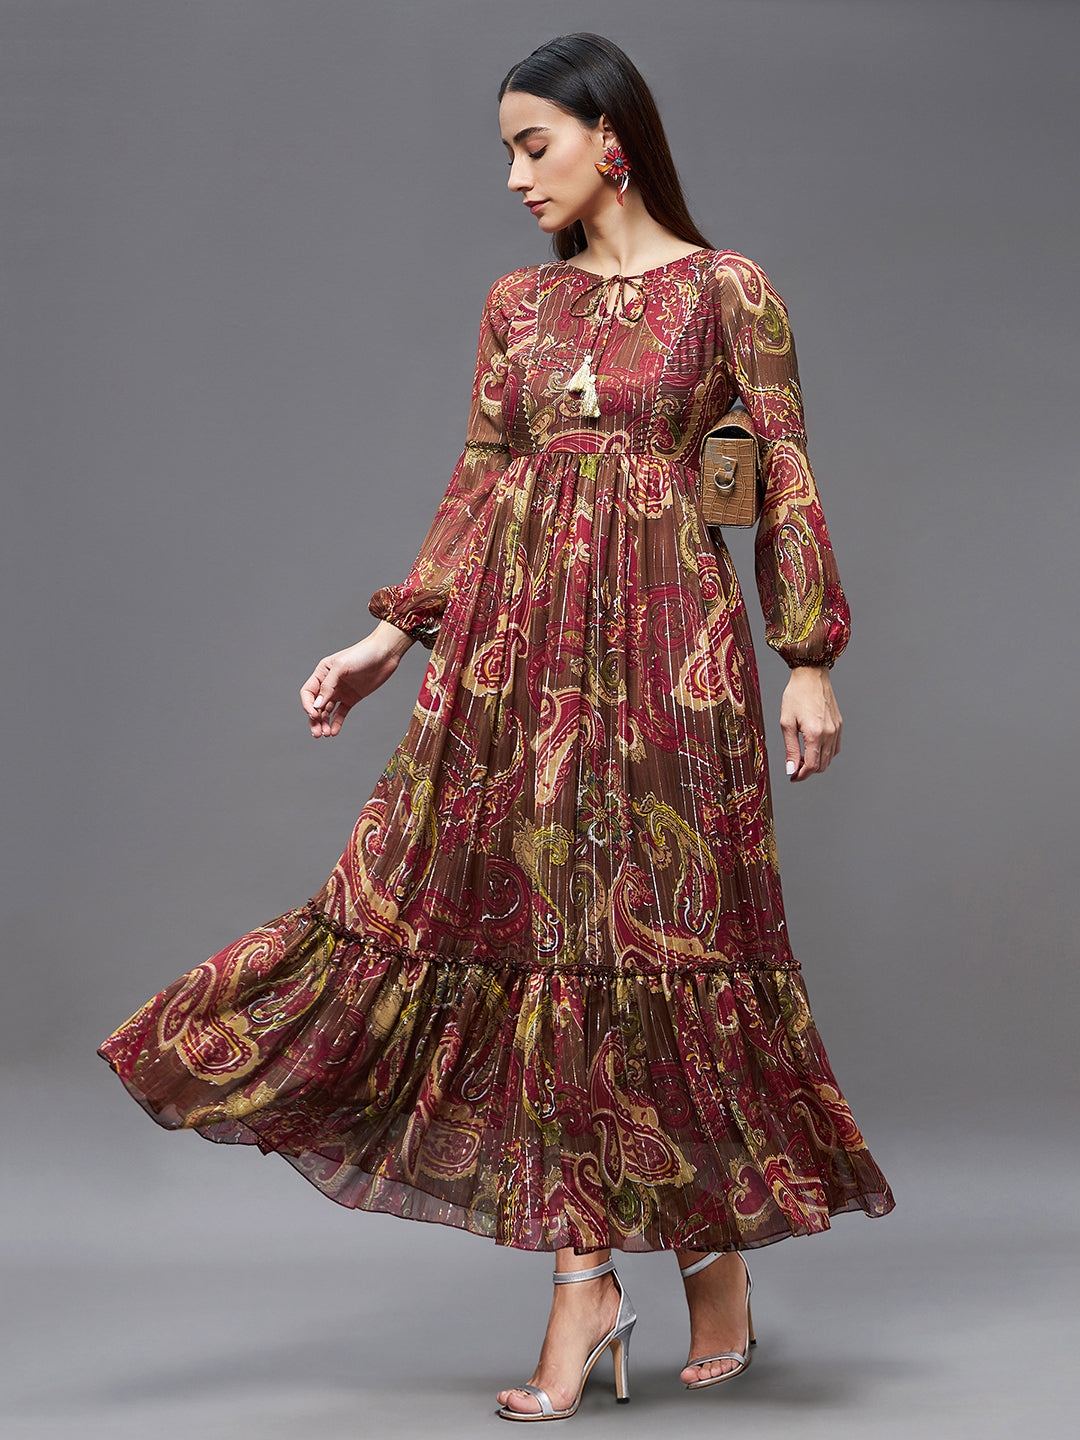 Multicolored-Base-Brown Relaxed Fit Maxi Lurex Chiffon Dress